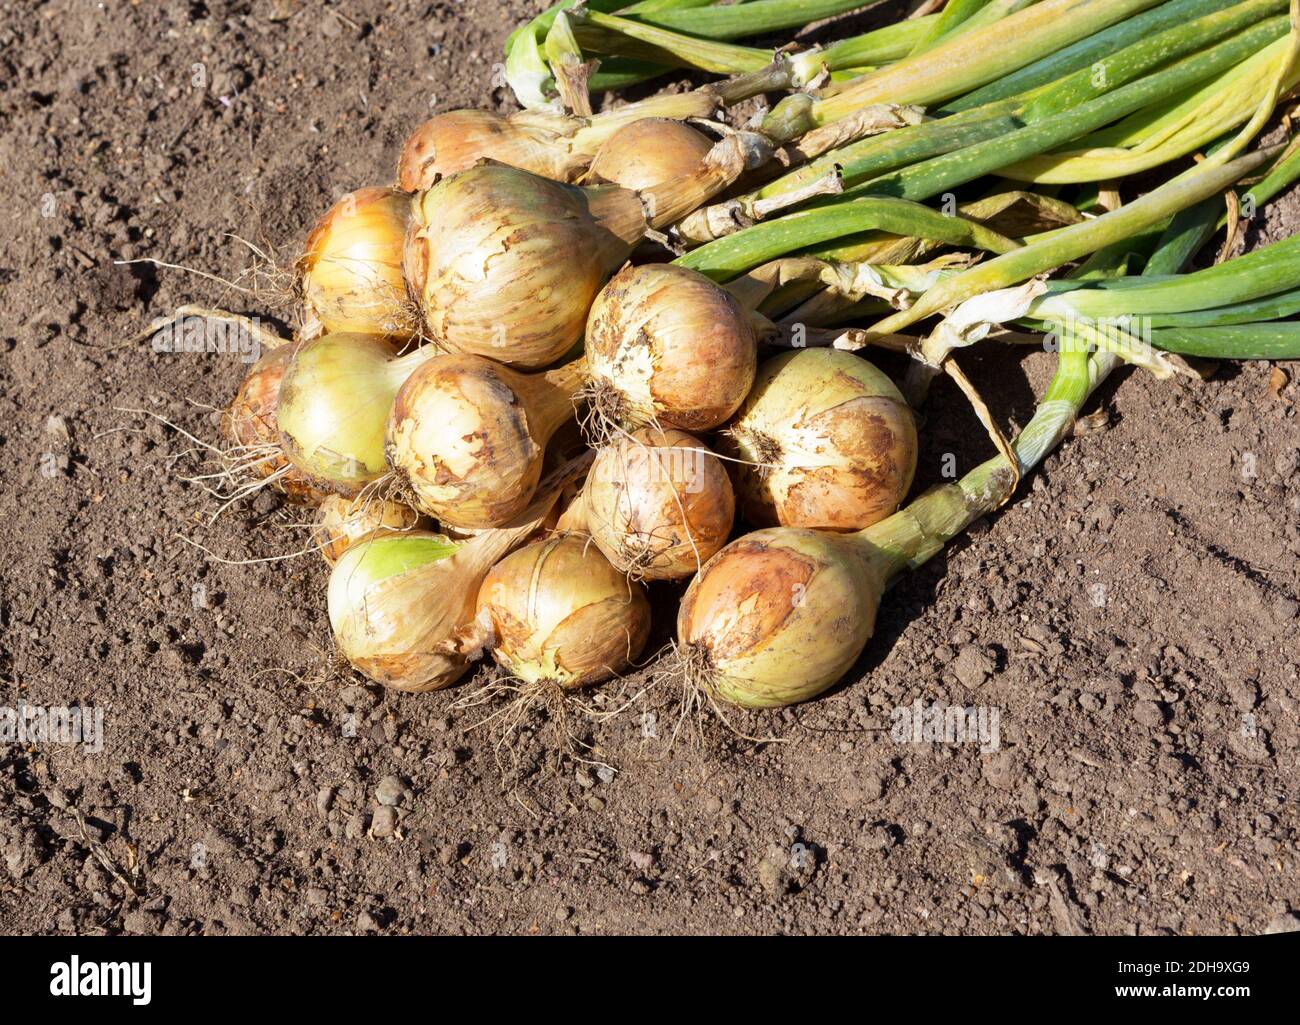 Onion harvest on the field. Autumn crop of vegetables in the garden. Grown Organic Onion Bulb. Stock Photo